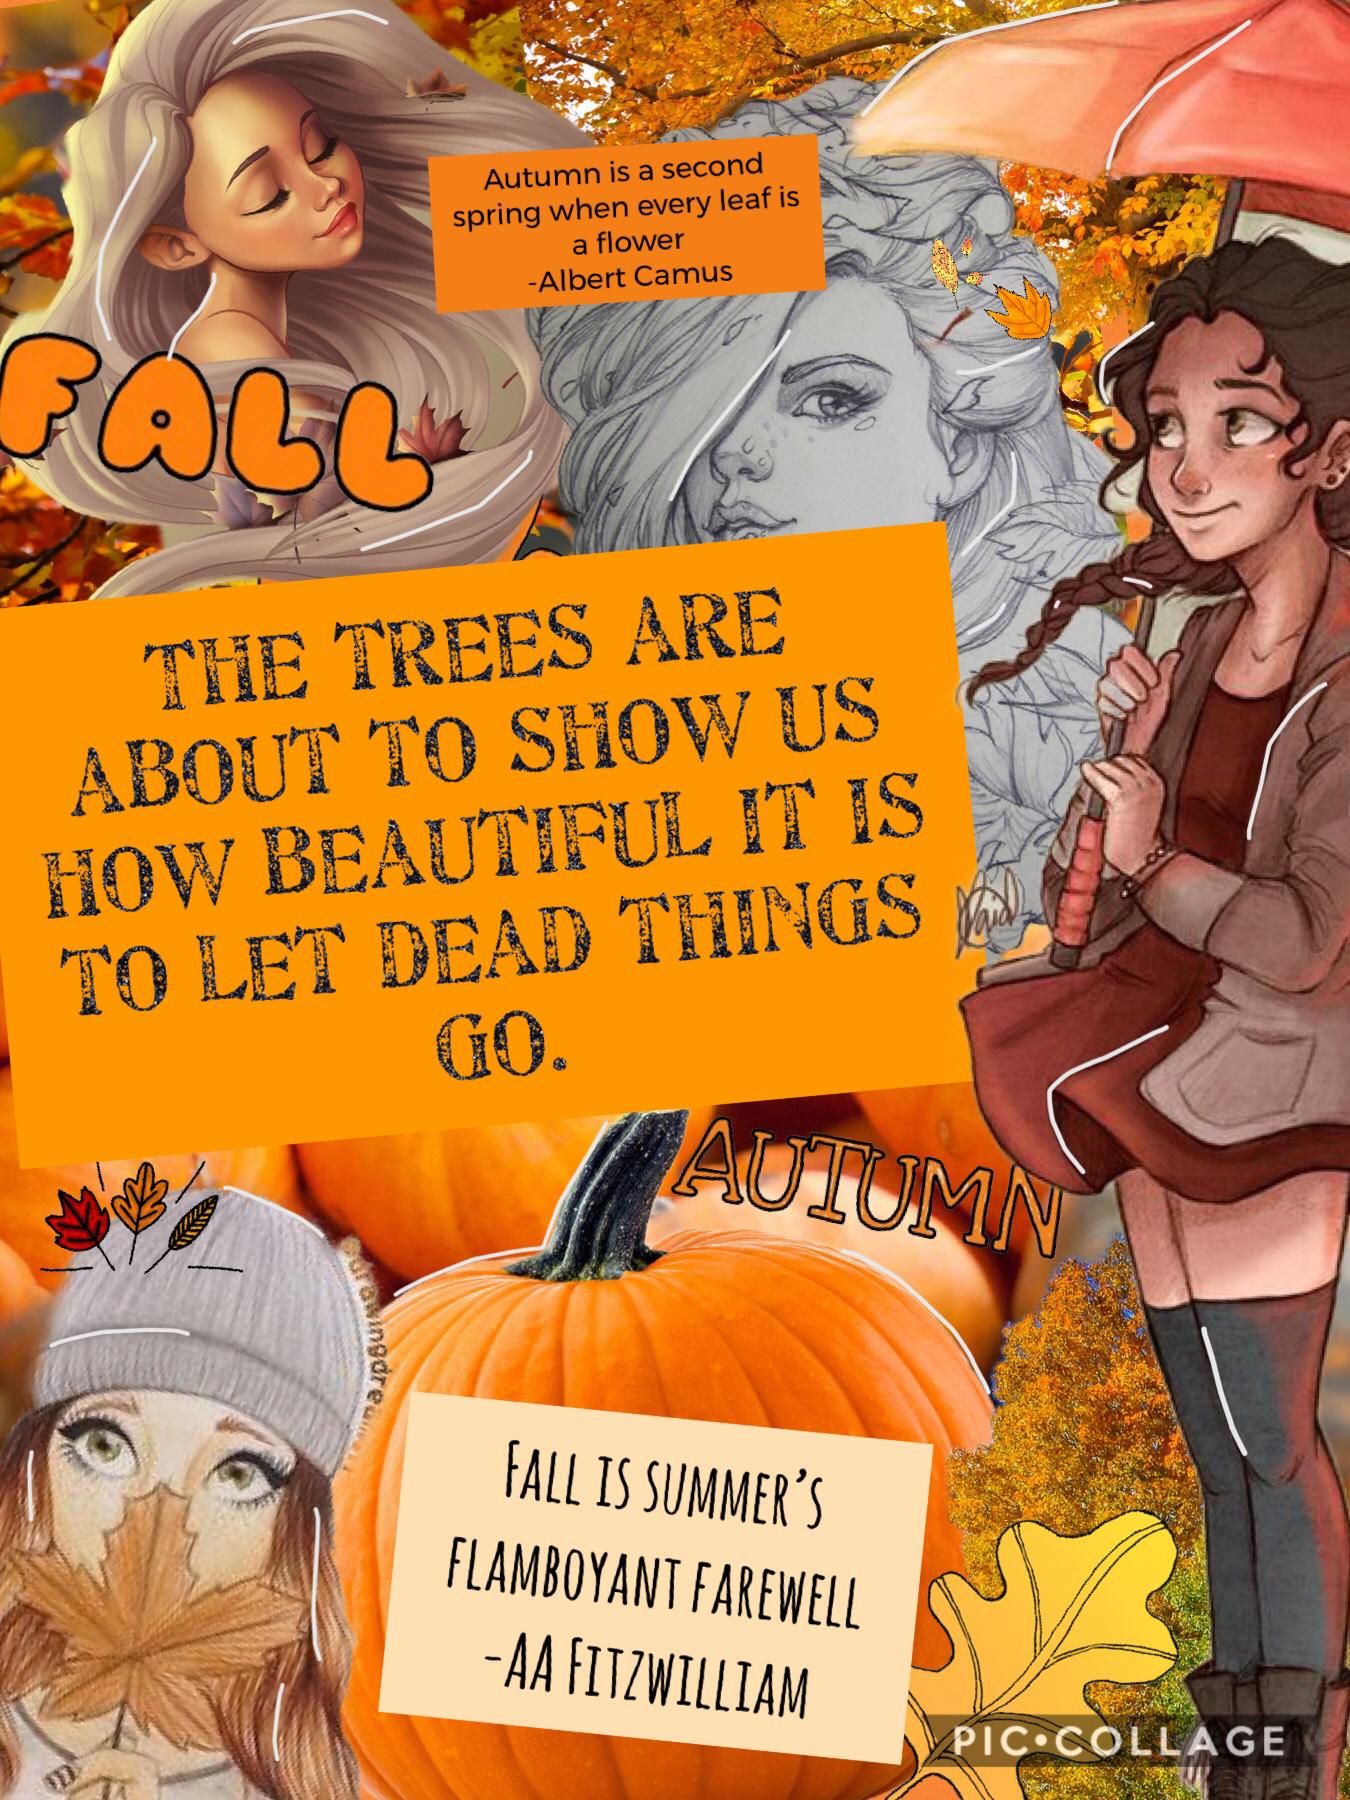 All of your fall themed collages have gotten me in the fall spirit! What should I do next?! Love ya lots!